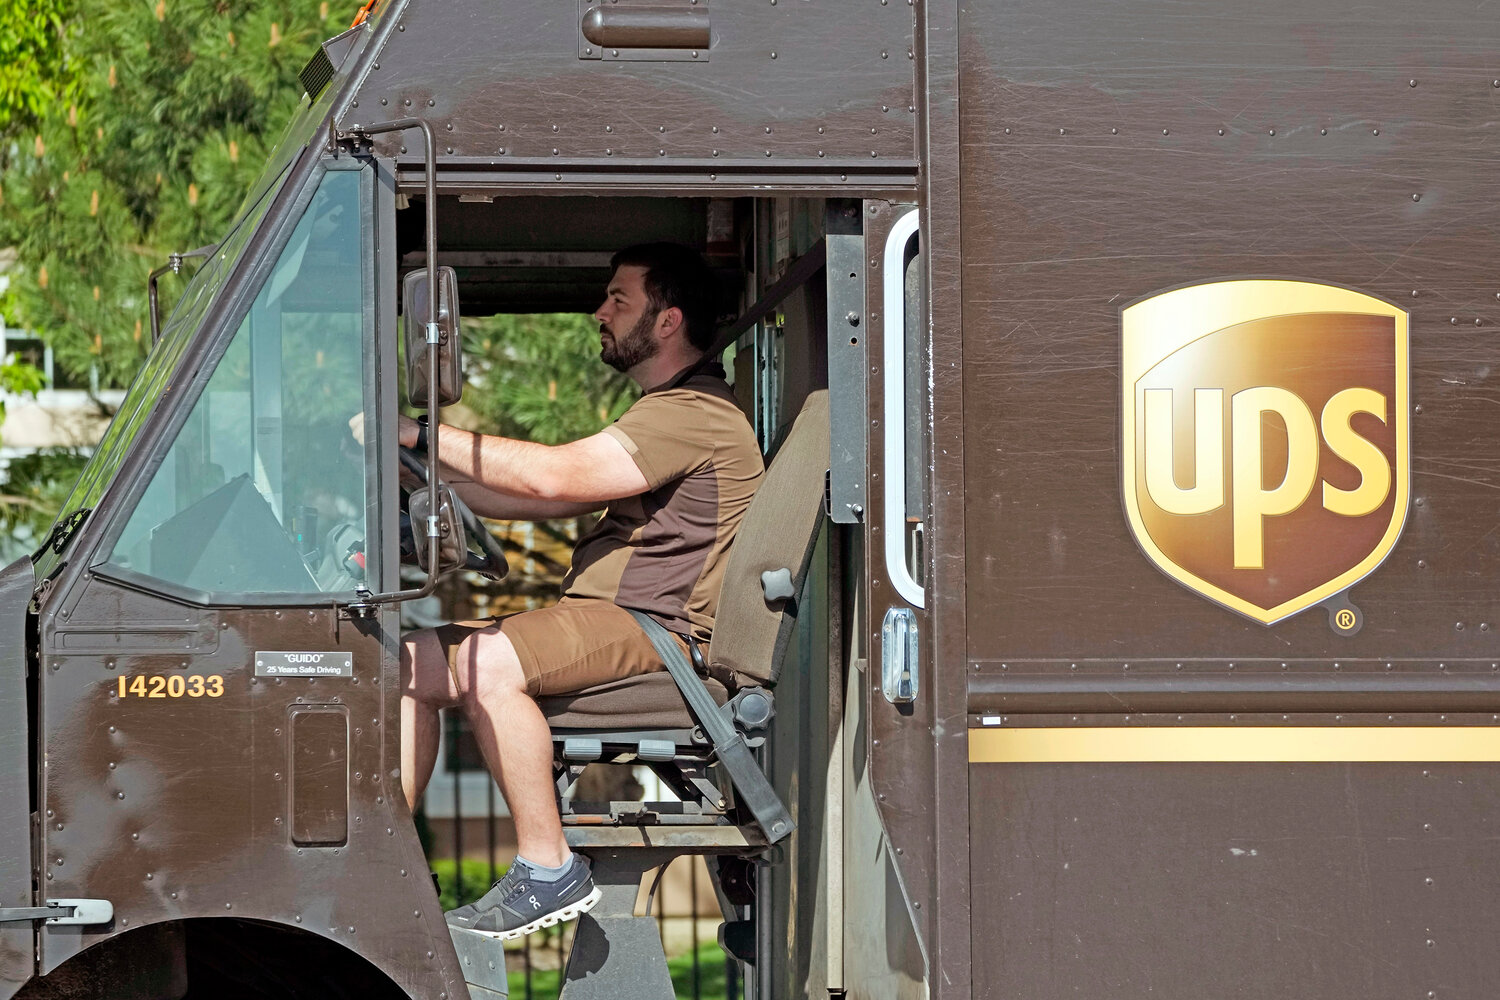 A UPS truck makes deliveries in Northbrook, Ill., Wednesday, May 10. More than 340,000 unionized United Parcel Service employees, including drivers and warehouse workers, say they are prepared to strike if the company does not meet their demands before the end of the current contract on July 31.